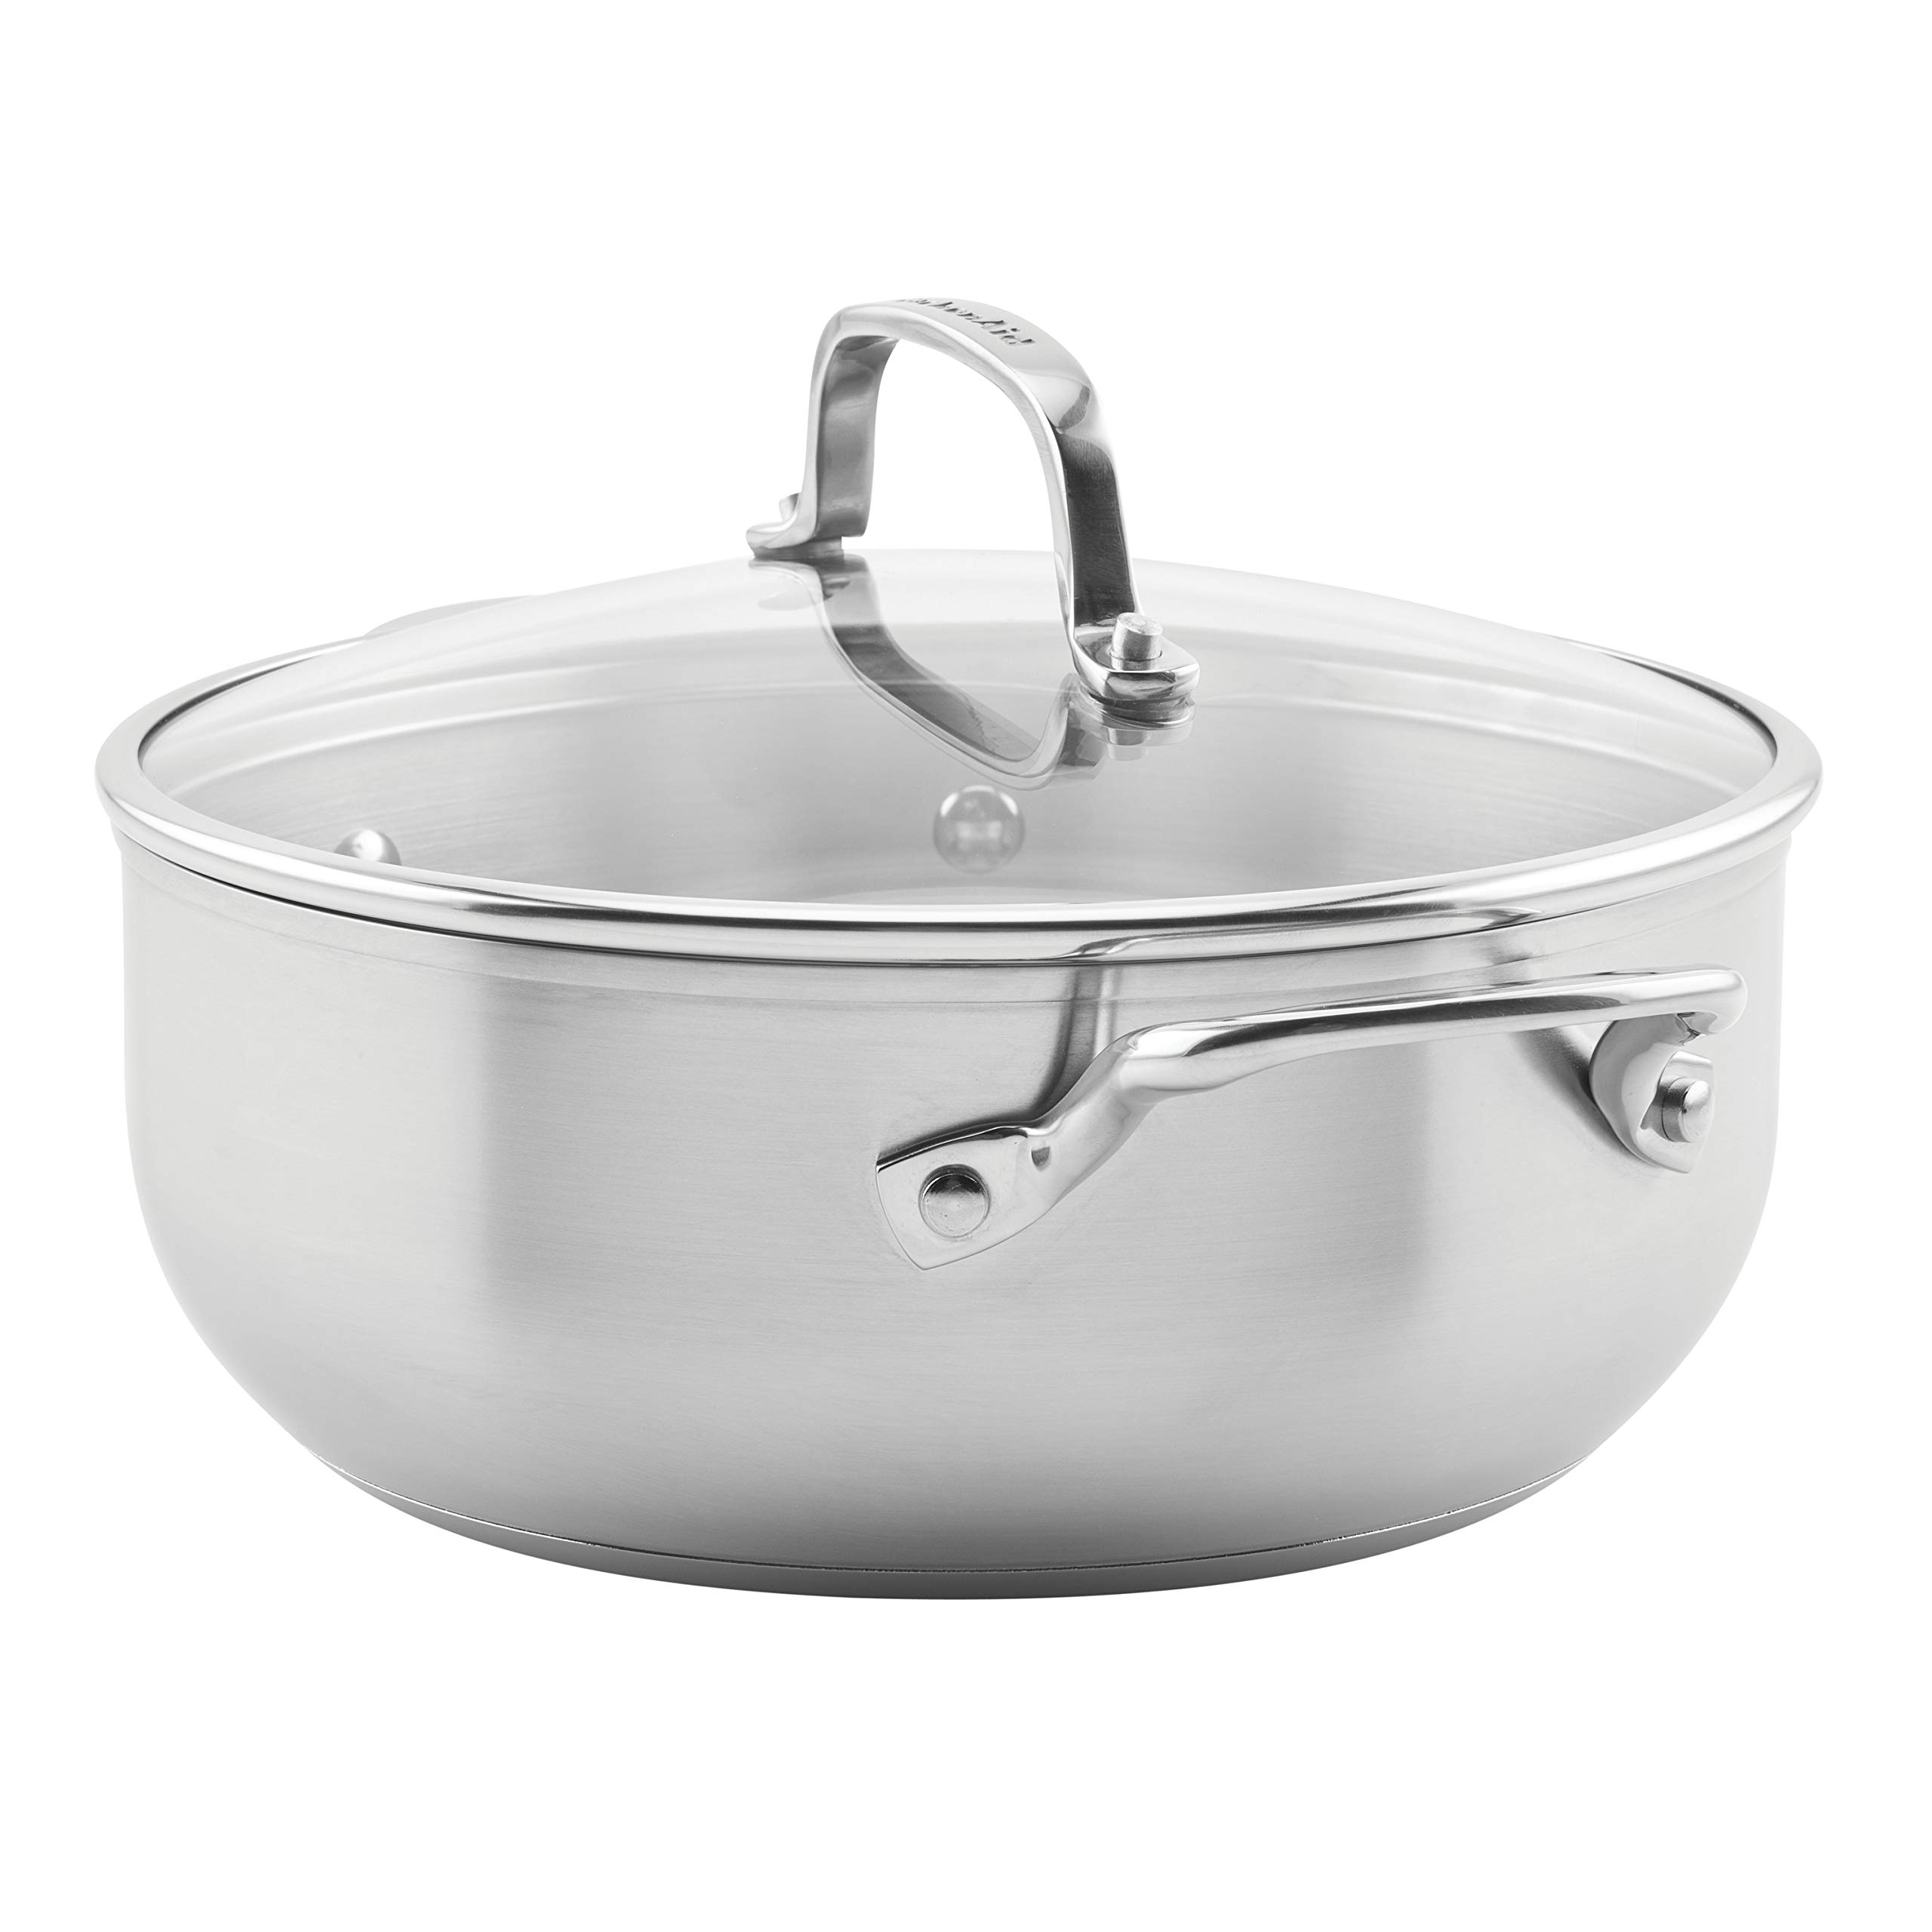 KitchenAid 3-Ply Base Brushed Stainless Steel Casserole Dish/Pan with Lid, 4 Quart